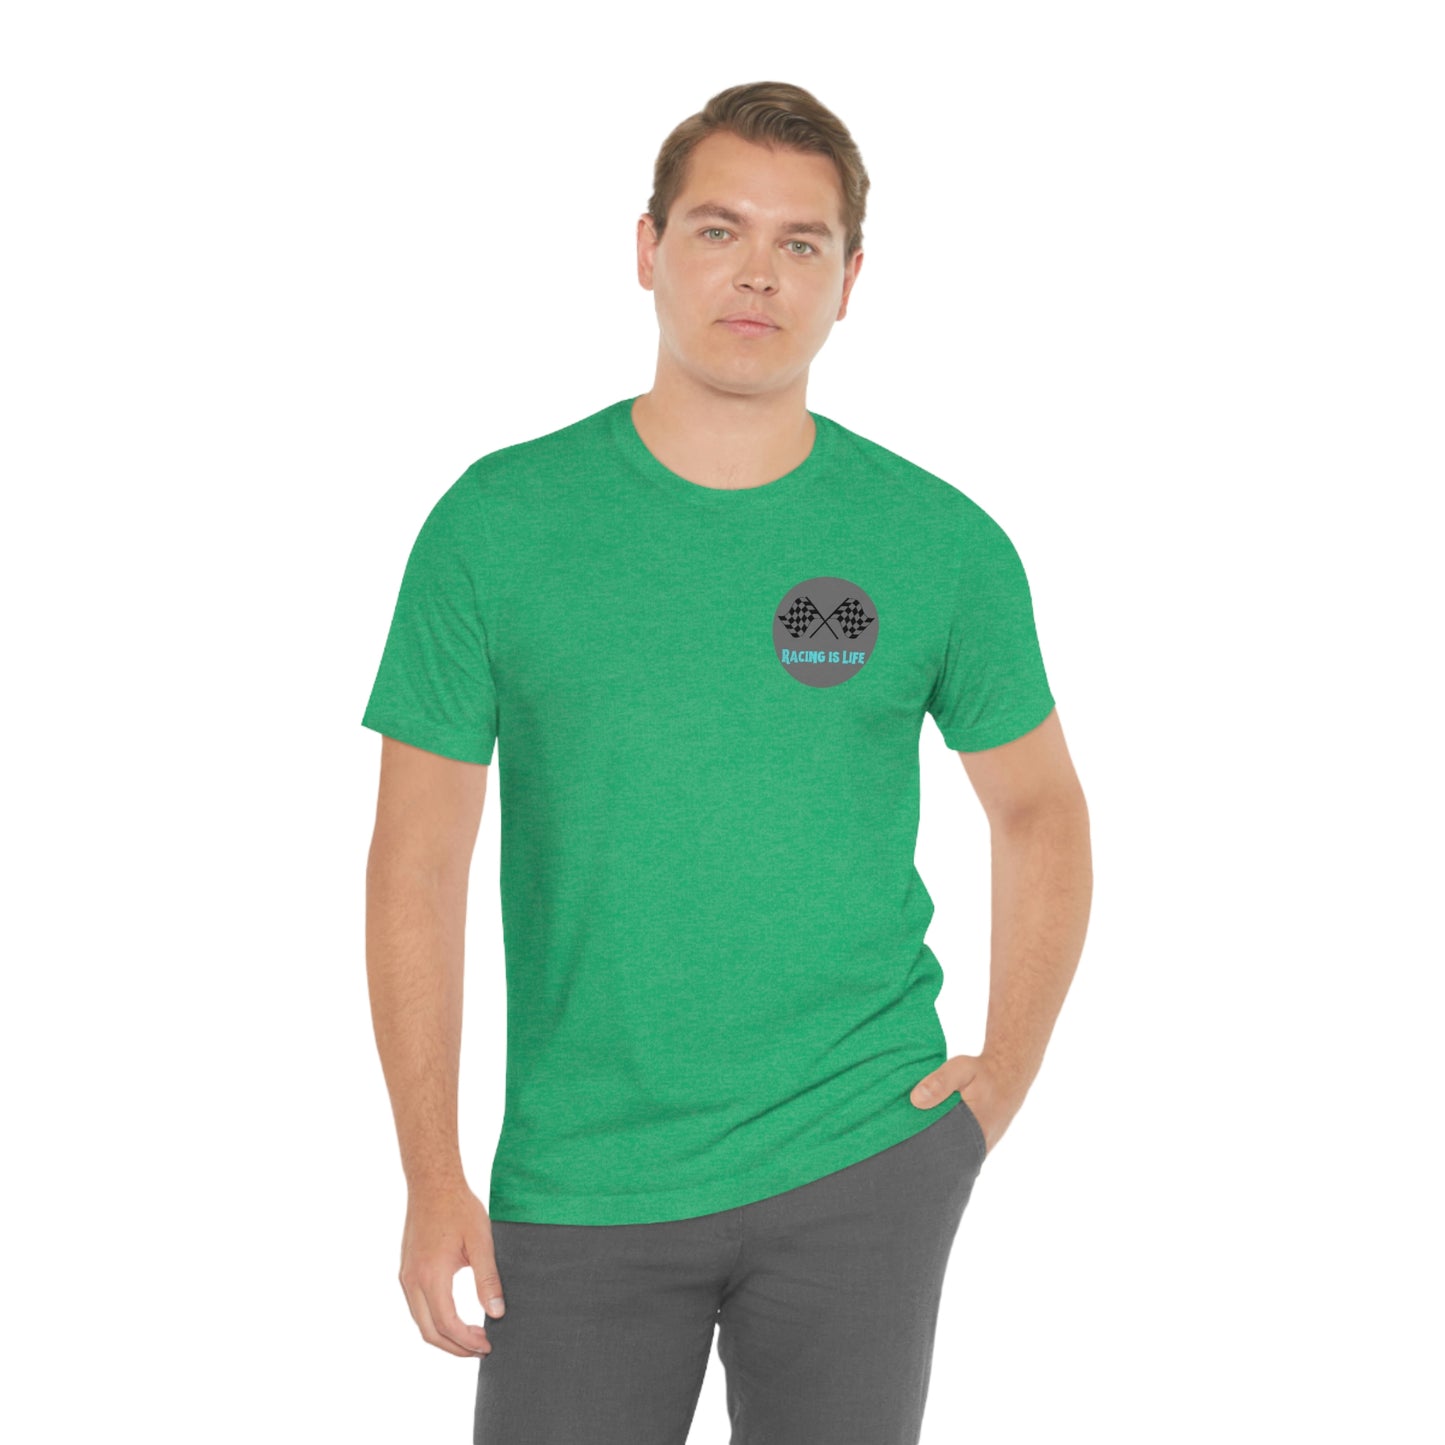 Racing Life -  Life is better at the track Jersey Short Sleeve Tee